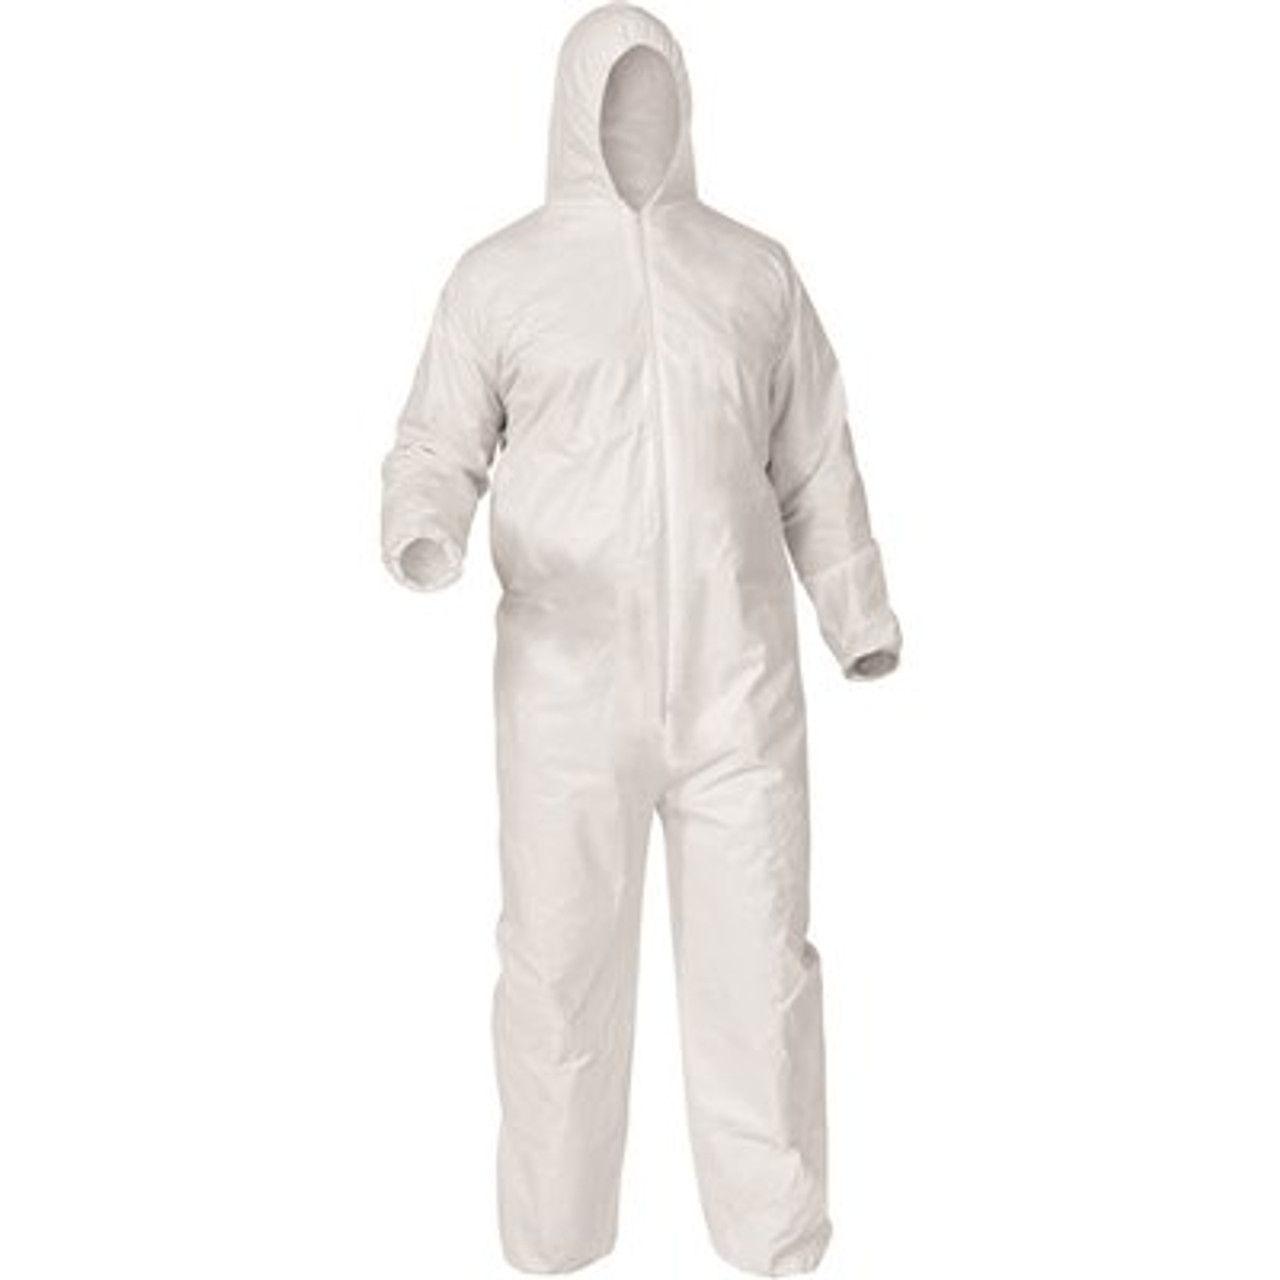 Kleenguard Unisex 5X-Large White Coverall Zip Front Elastic Wrist/Ankle With Collar (25-Pack)